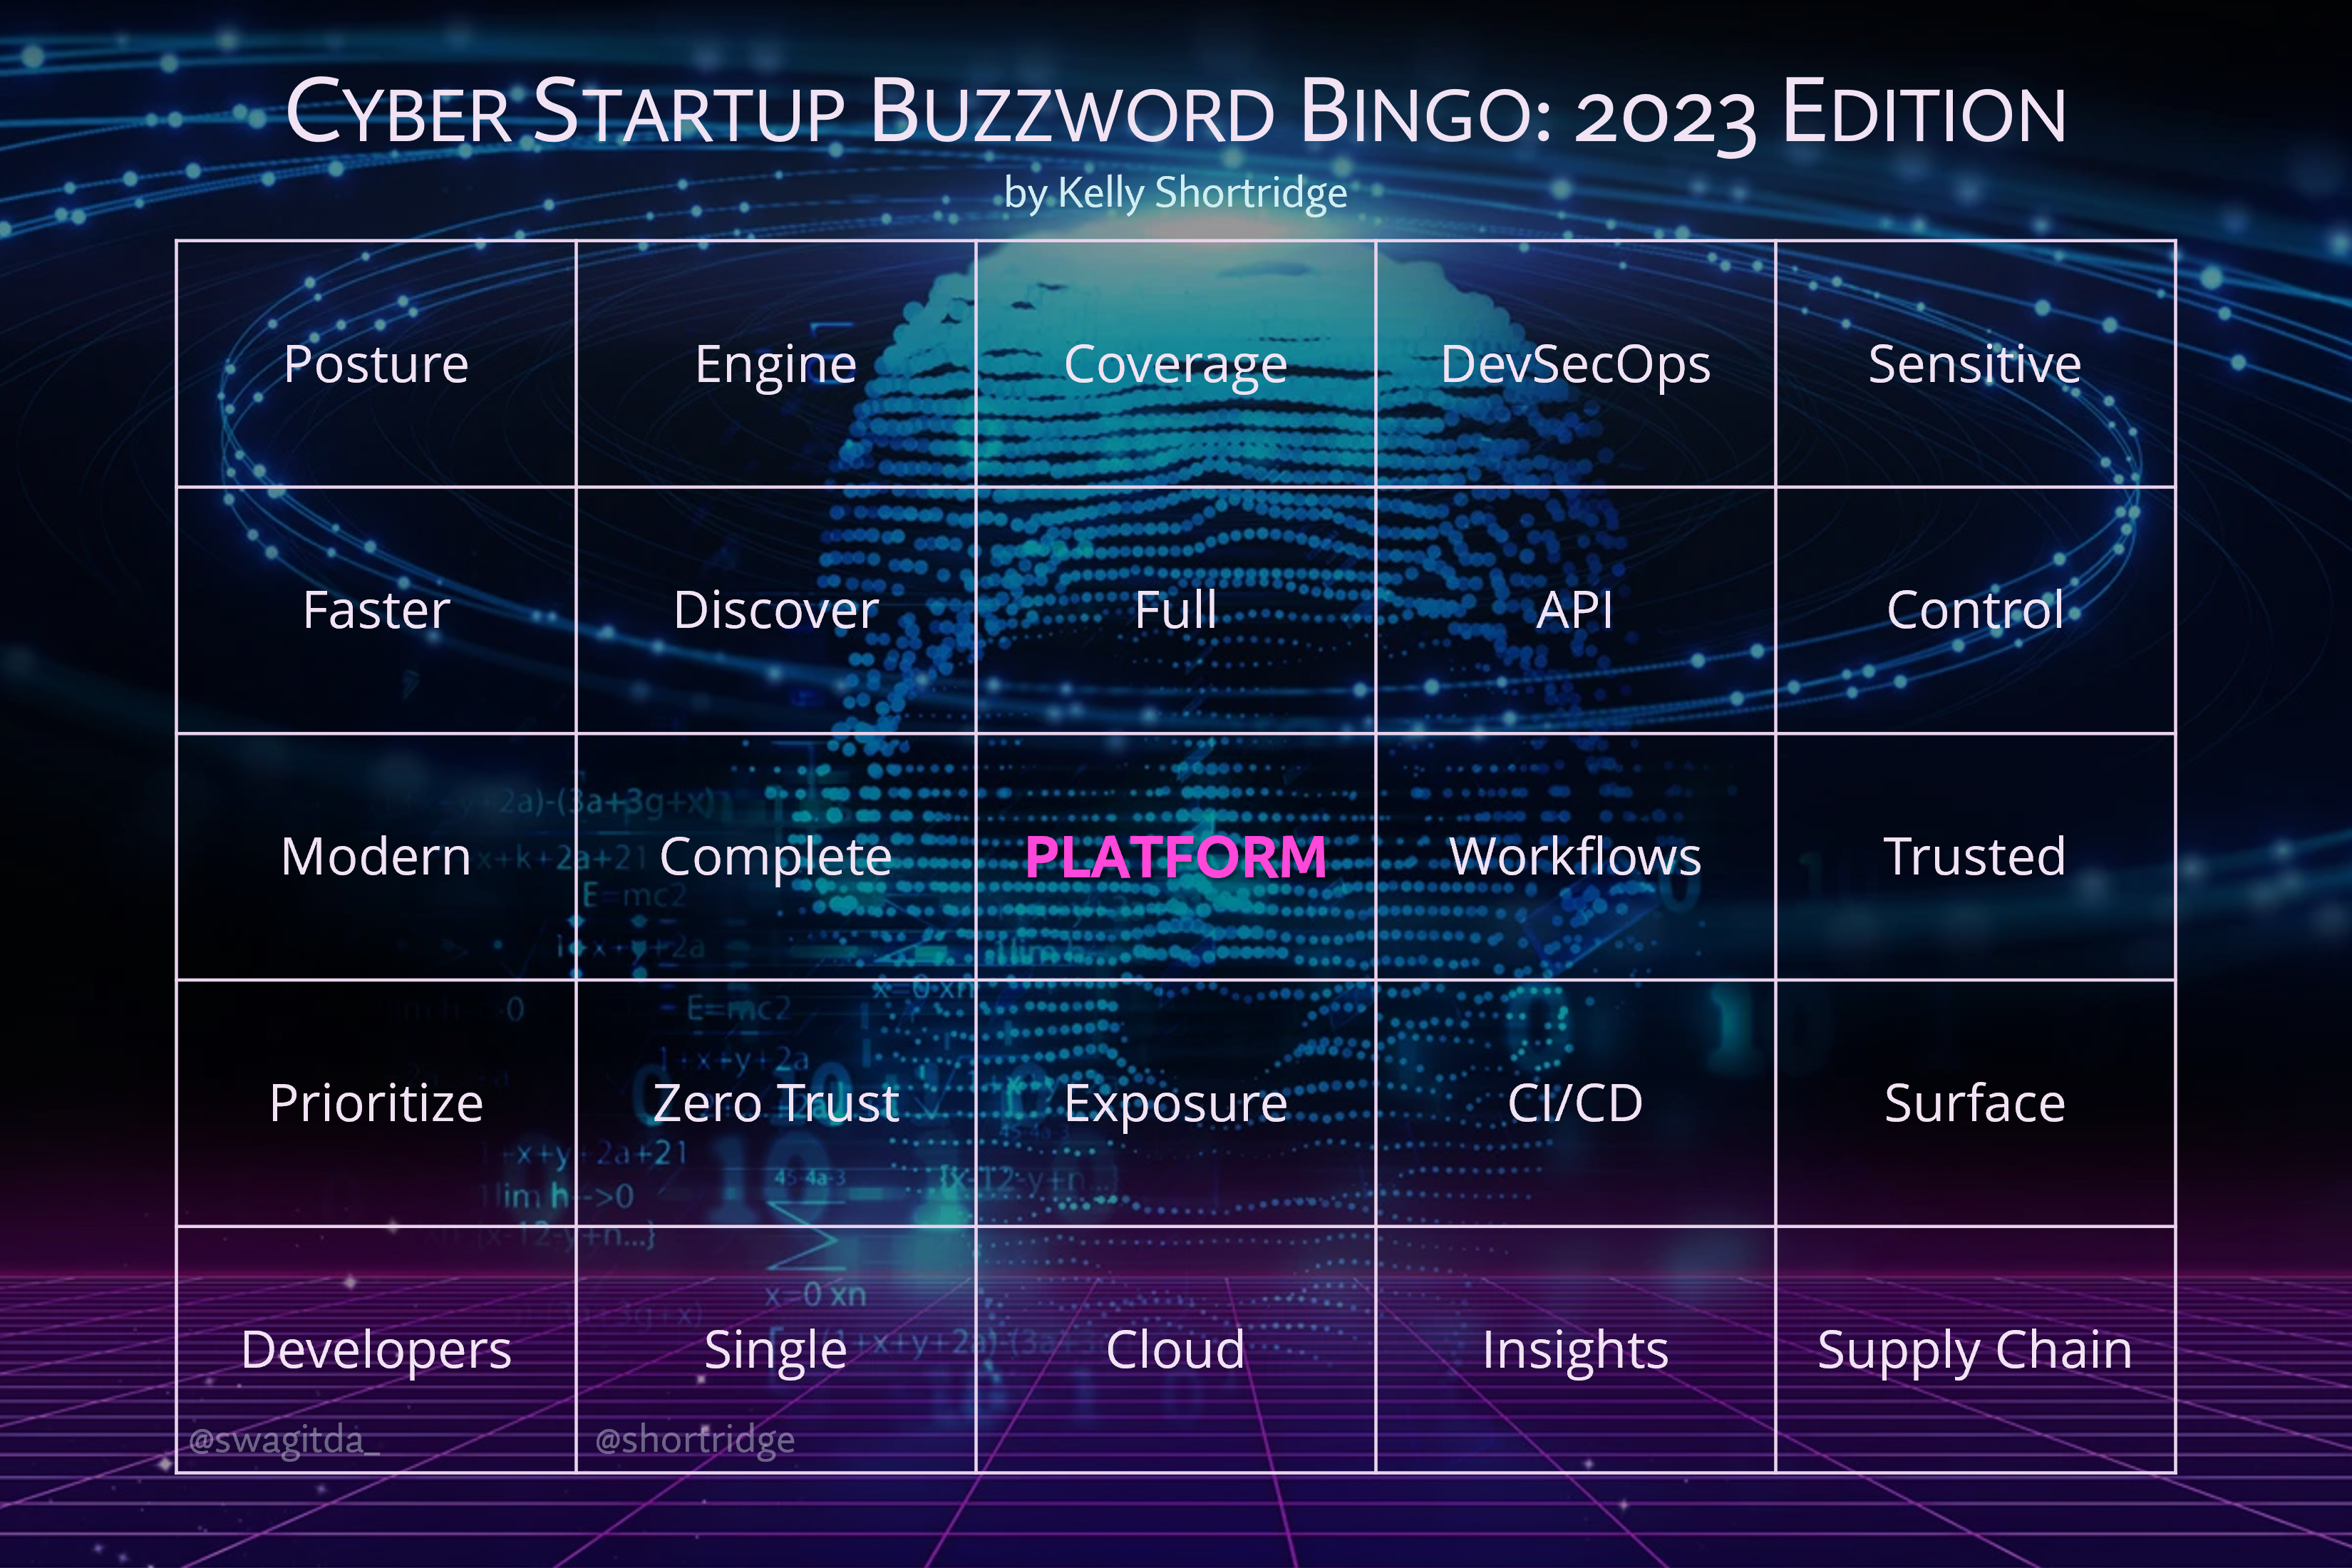 The 2023 edition of the cyber buzzword bingo card. The background is terrible cyber art that is roughly a head made up of code with glowing digital bits swirling around it. The head hovers over a purple and pink checkered floor; it&rsquo;s all very cyber. In order from left to right, starting on the upper left side, the buzzwords included on the card are as follows. Posture. Engine. Coverage. DevSecOps. Sensitive. Faster. Discover. Full. API. Control. Modern. Complete. Platform, which is the center word of the bingo card. Workflows. Trusted. Prioritize. Zero Trust. Exposure. CI/CD. Surface. Developers. Single. Cloud. Insights. Supply Chain.